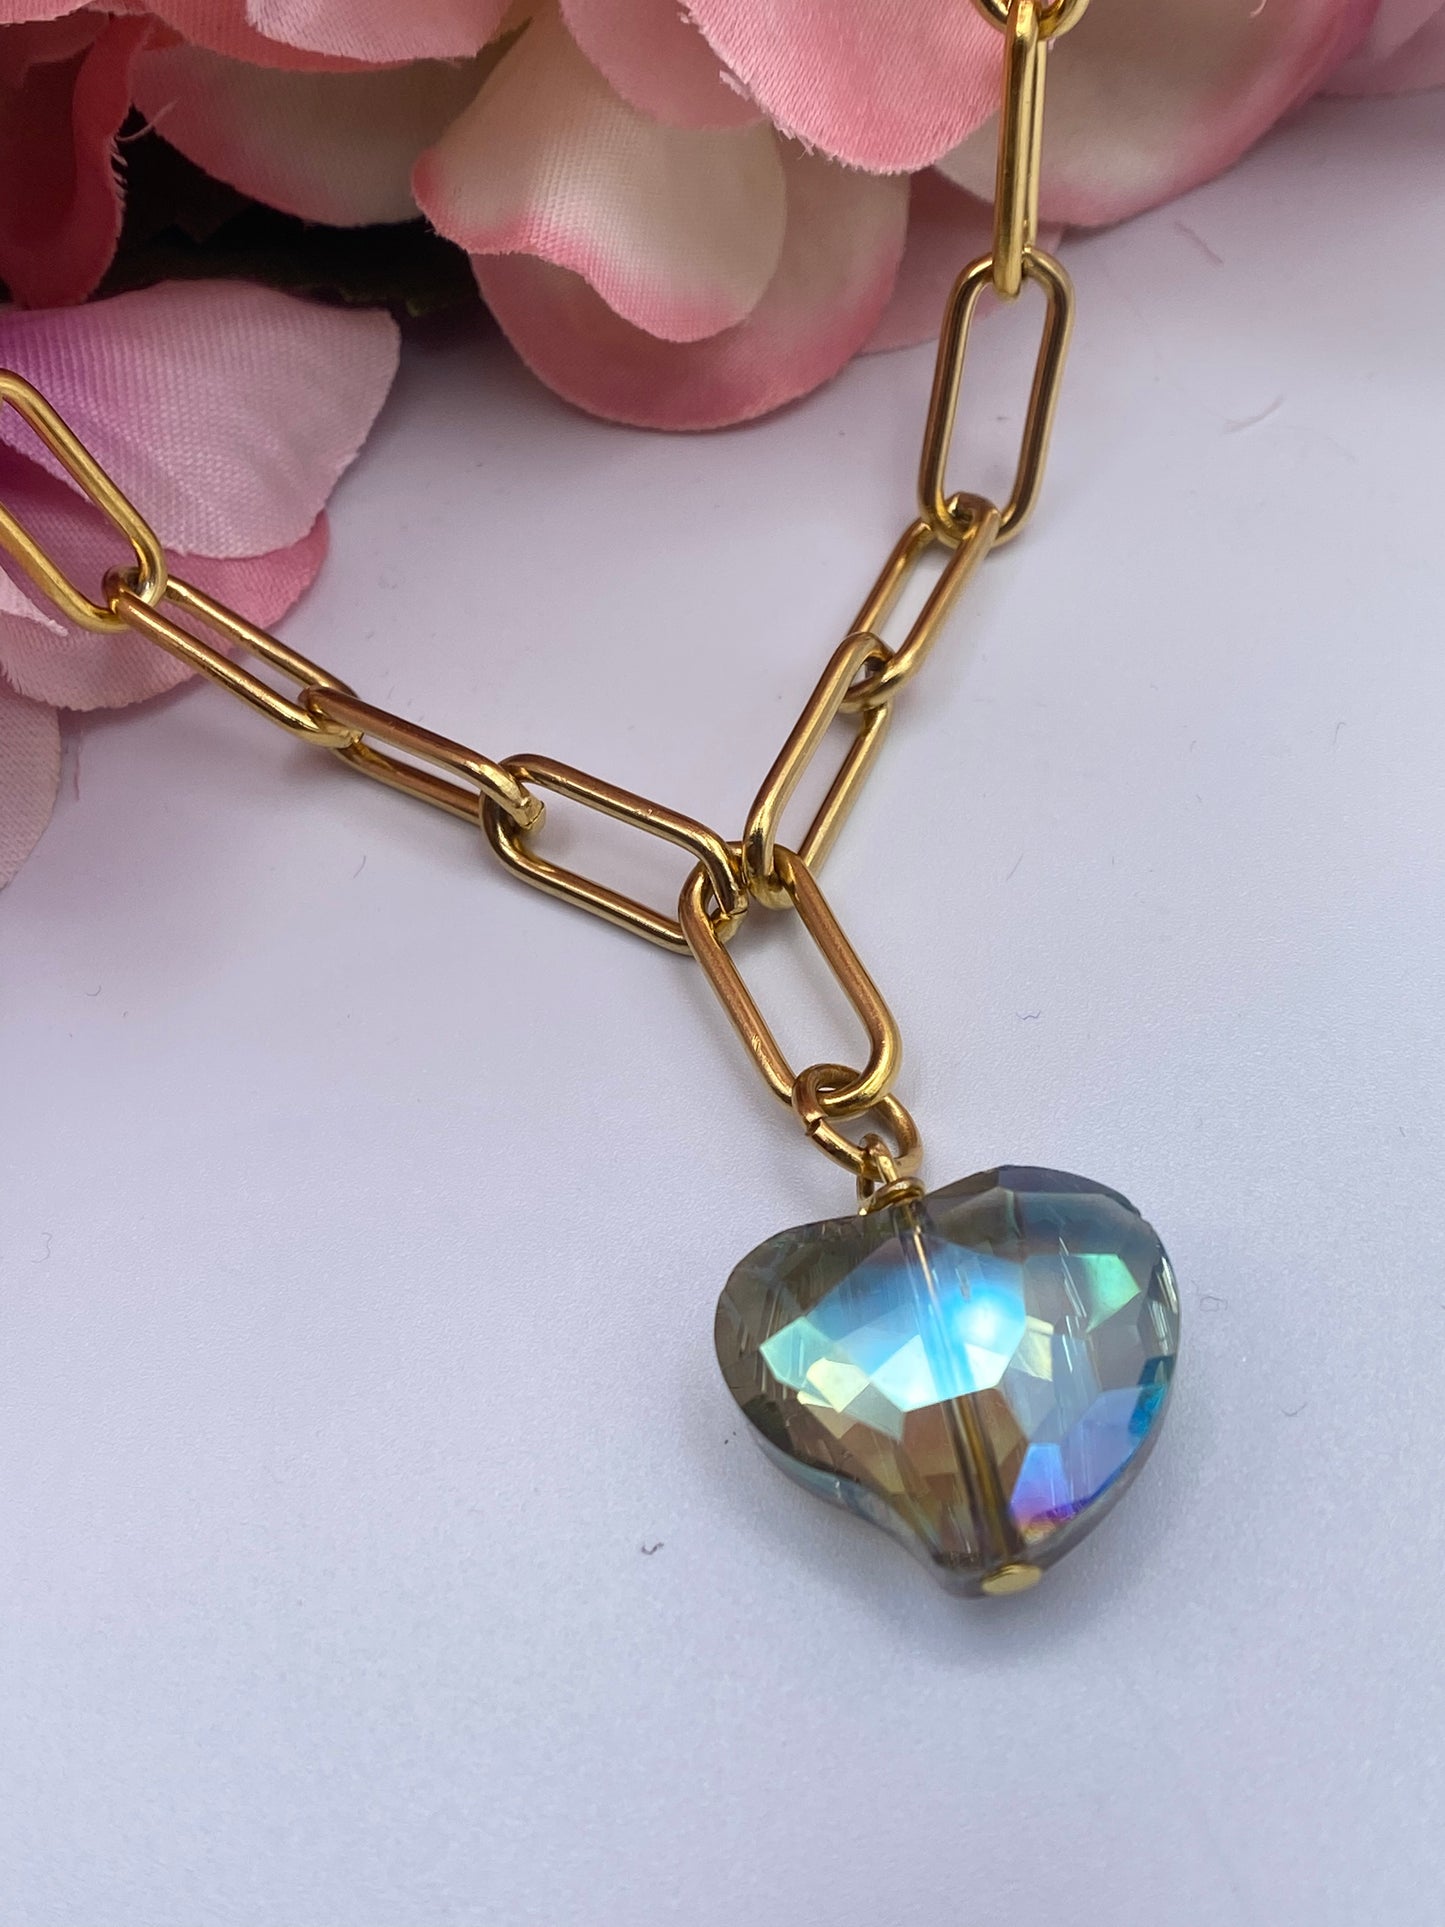 N38-CHOKER NECKLACE - Crystal Electroplate Heart